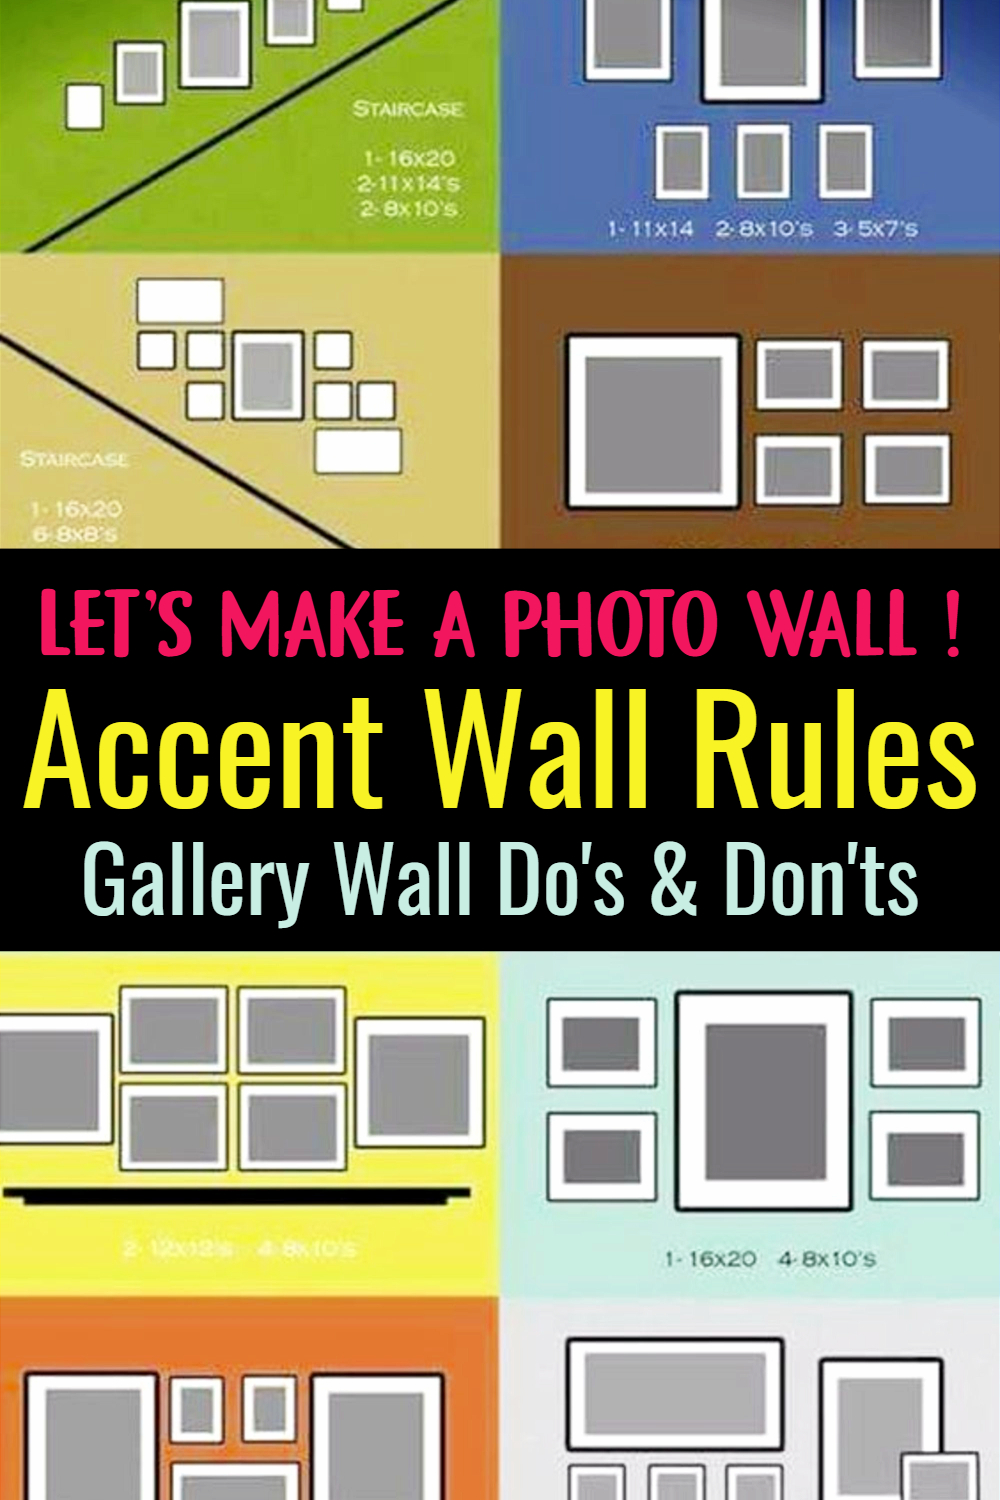 Accent Walls Rules for Creating a Photo Accent Wall - Images of Accent Walls and Accent Wall Ideas, Dos and Don'ts - PICTURES living room accent wall with brown furniture - decorating ideas for tv wall - accent wall paint pattern ideas - how to choose an accent wall in living room - examples of accent wall color combinations	- gallery wall dos and donts - learn how to make a photo wall in your room and how to create a gallery wall around tv